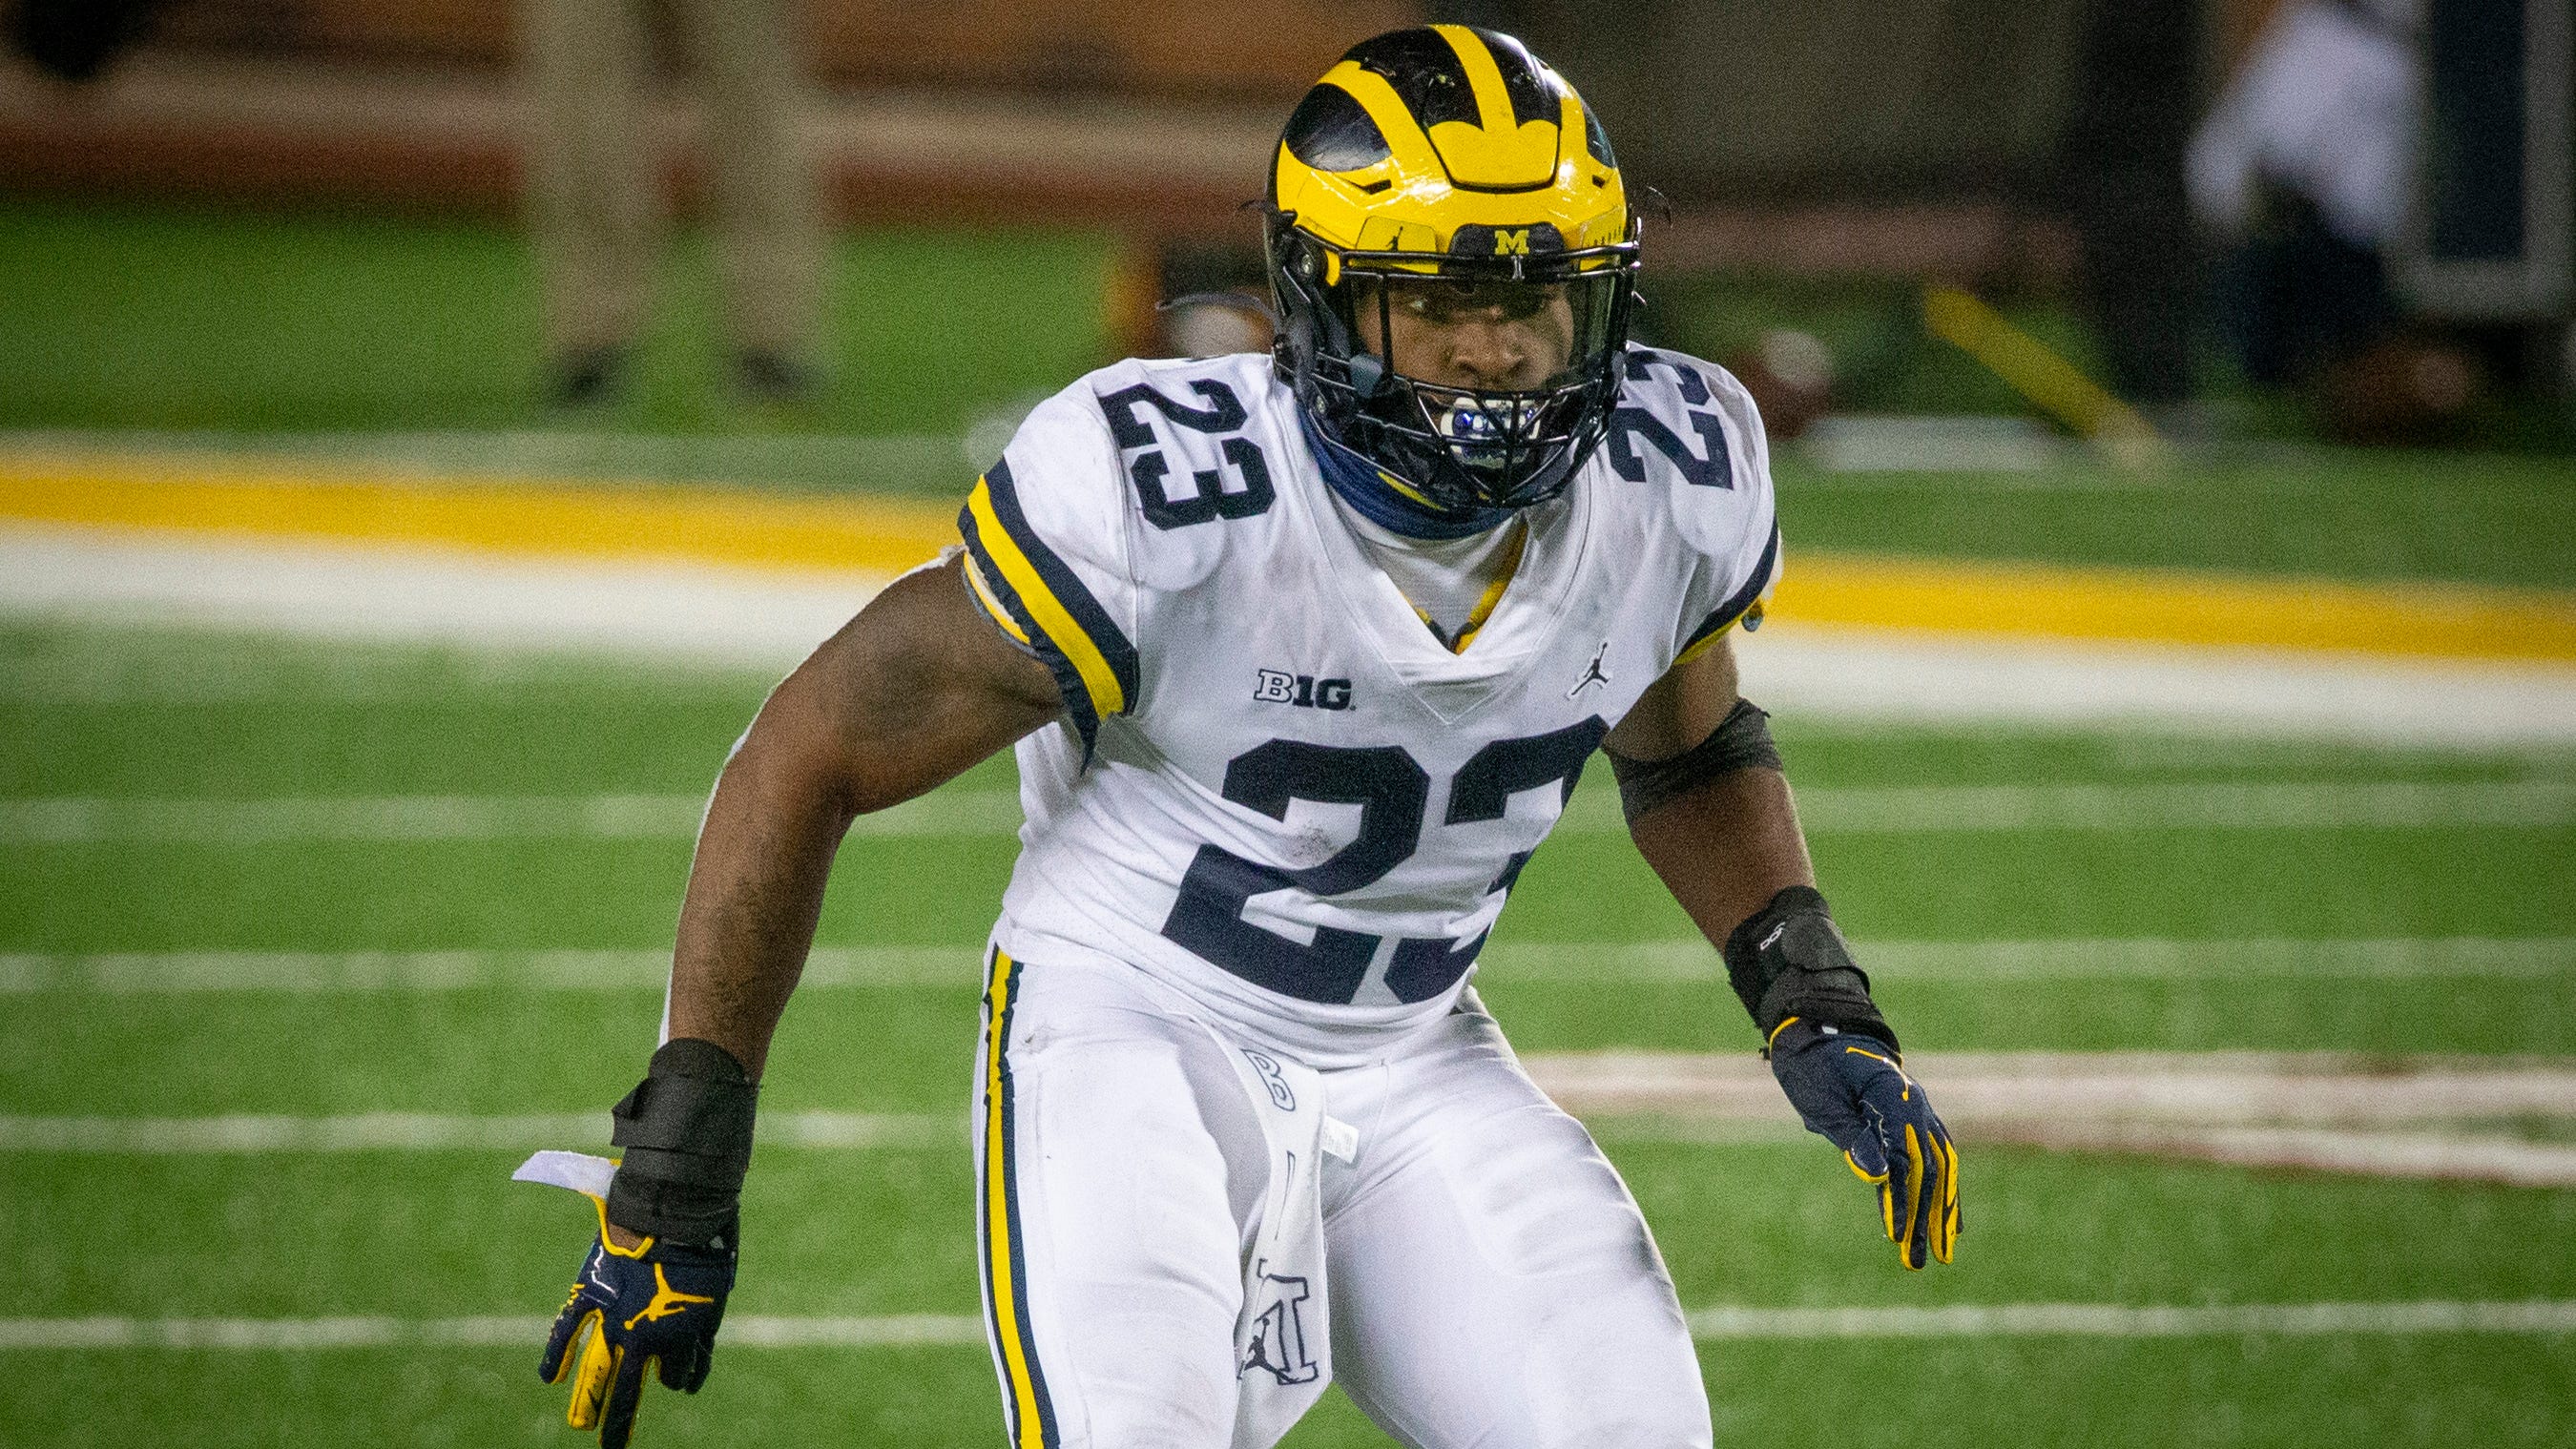 Michigan linebackers aim to 'clean up' mistakes vs. dynamic Indiana offense